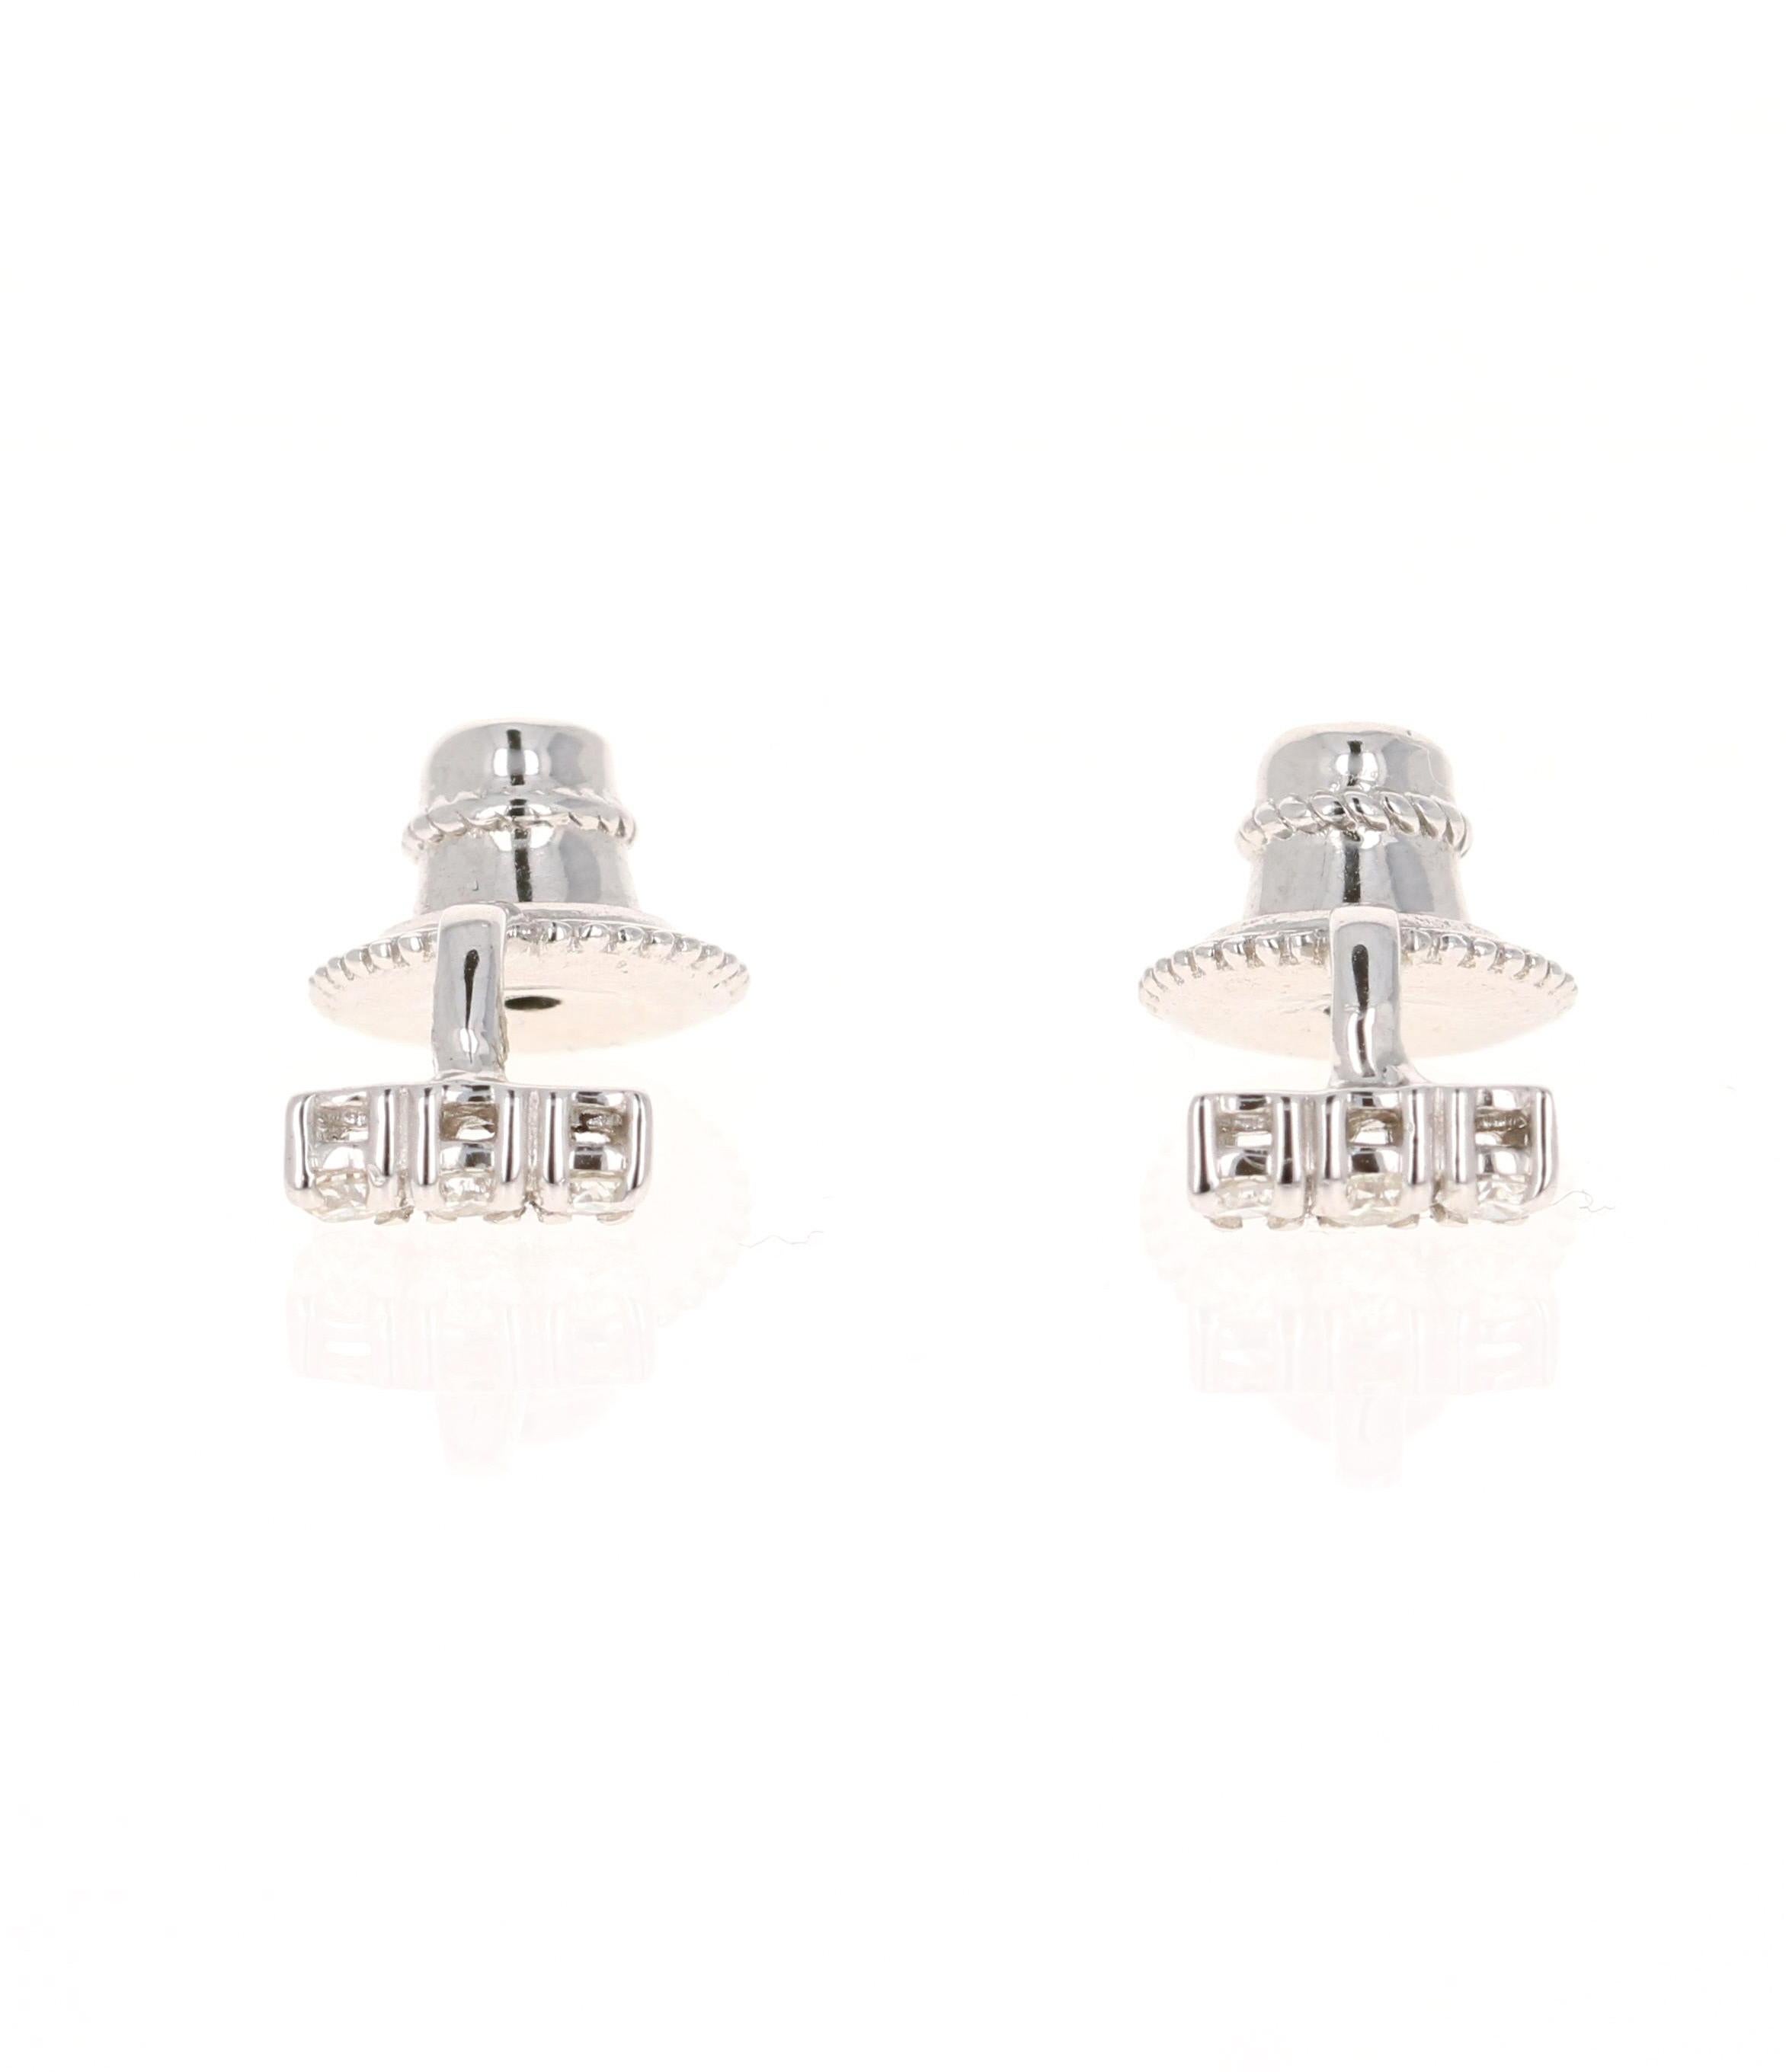 0.45 Carat Round Cut Diamond 14 Karat White Gold Ear Crawler Earrings In New Condition For Sale In Los Angeles, CA